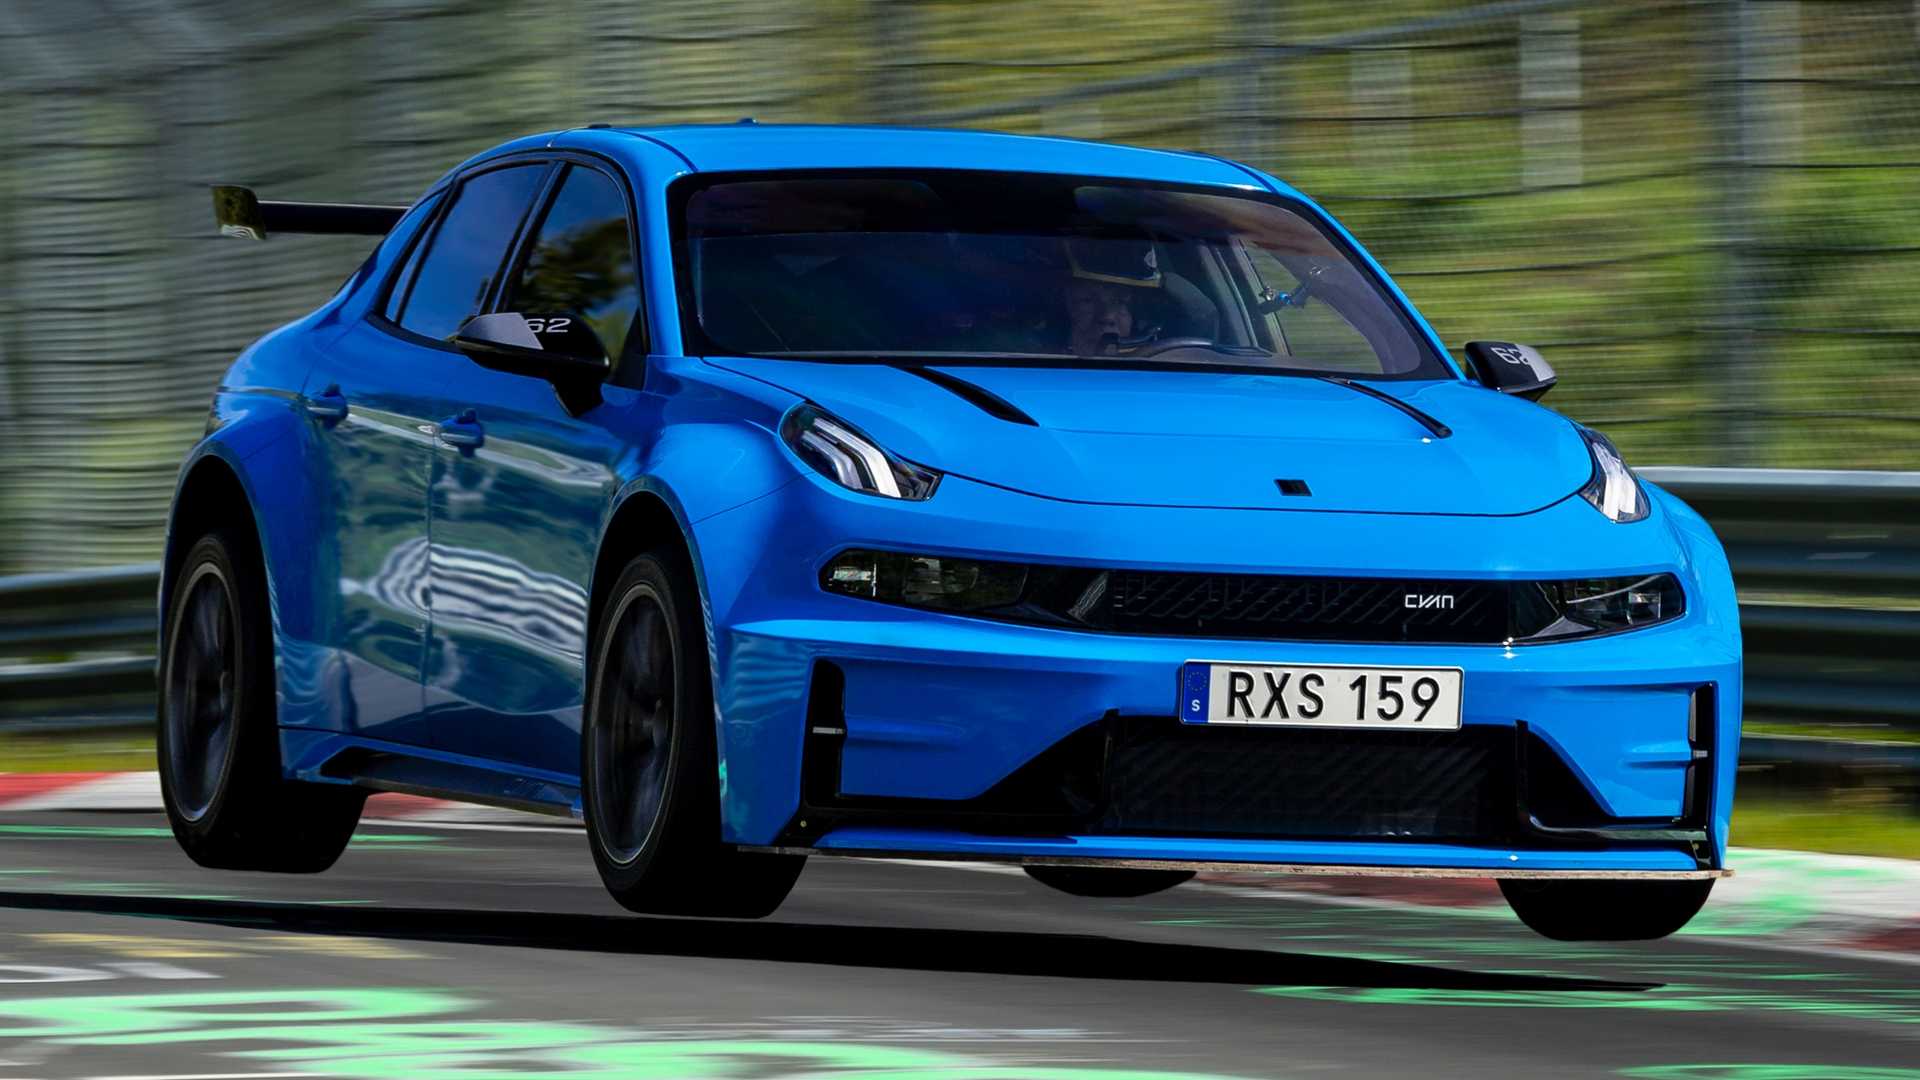 lynk-co-03-cyan-concept-sets-front-wheel-drive-and-four-door-nurburgring-records-8